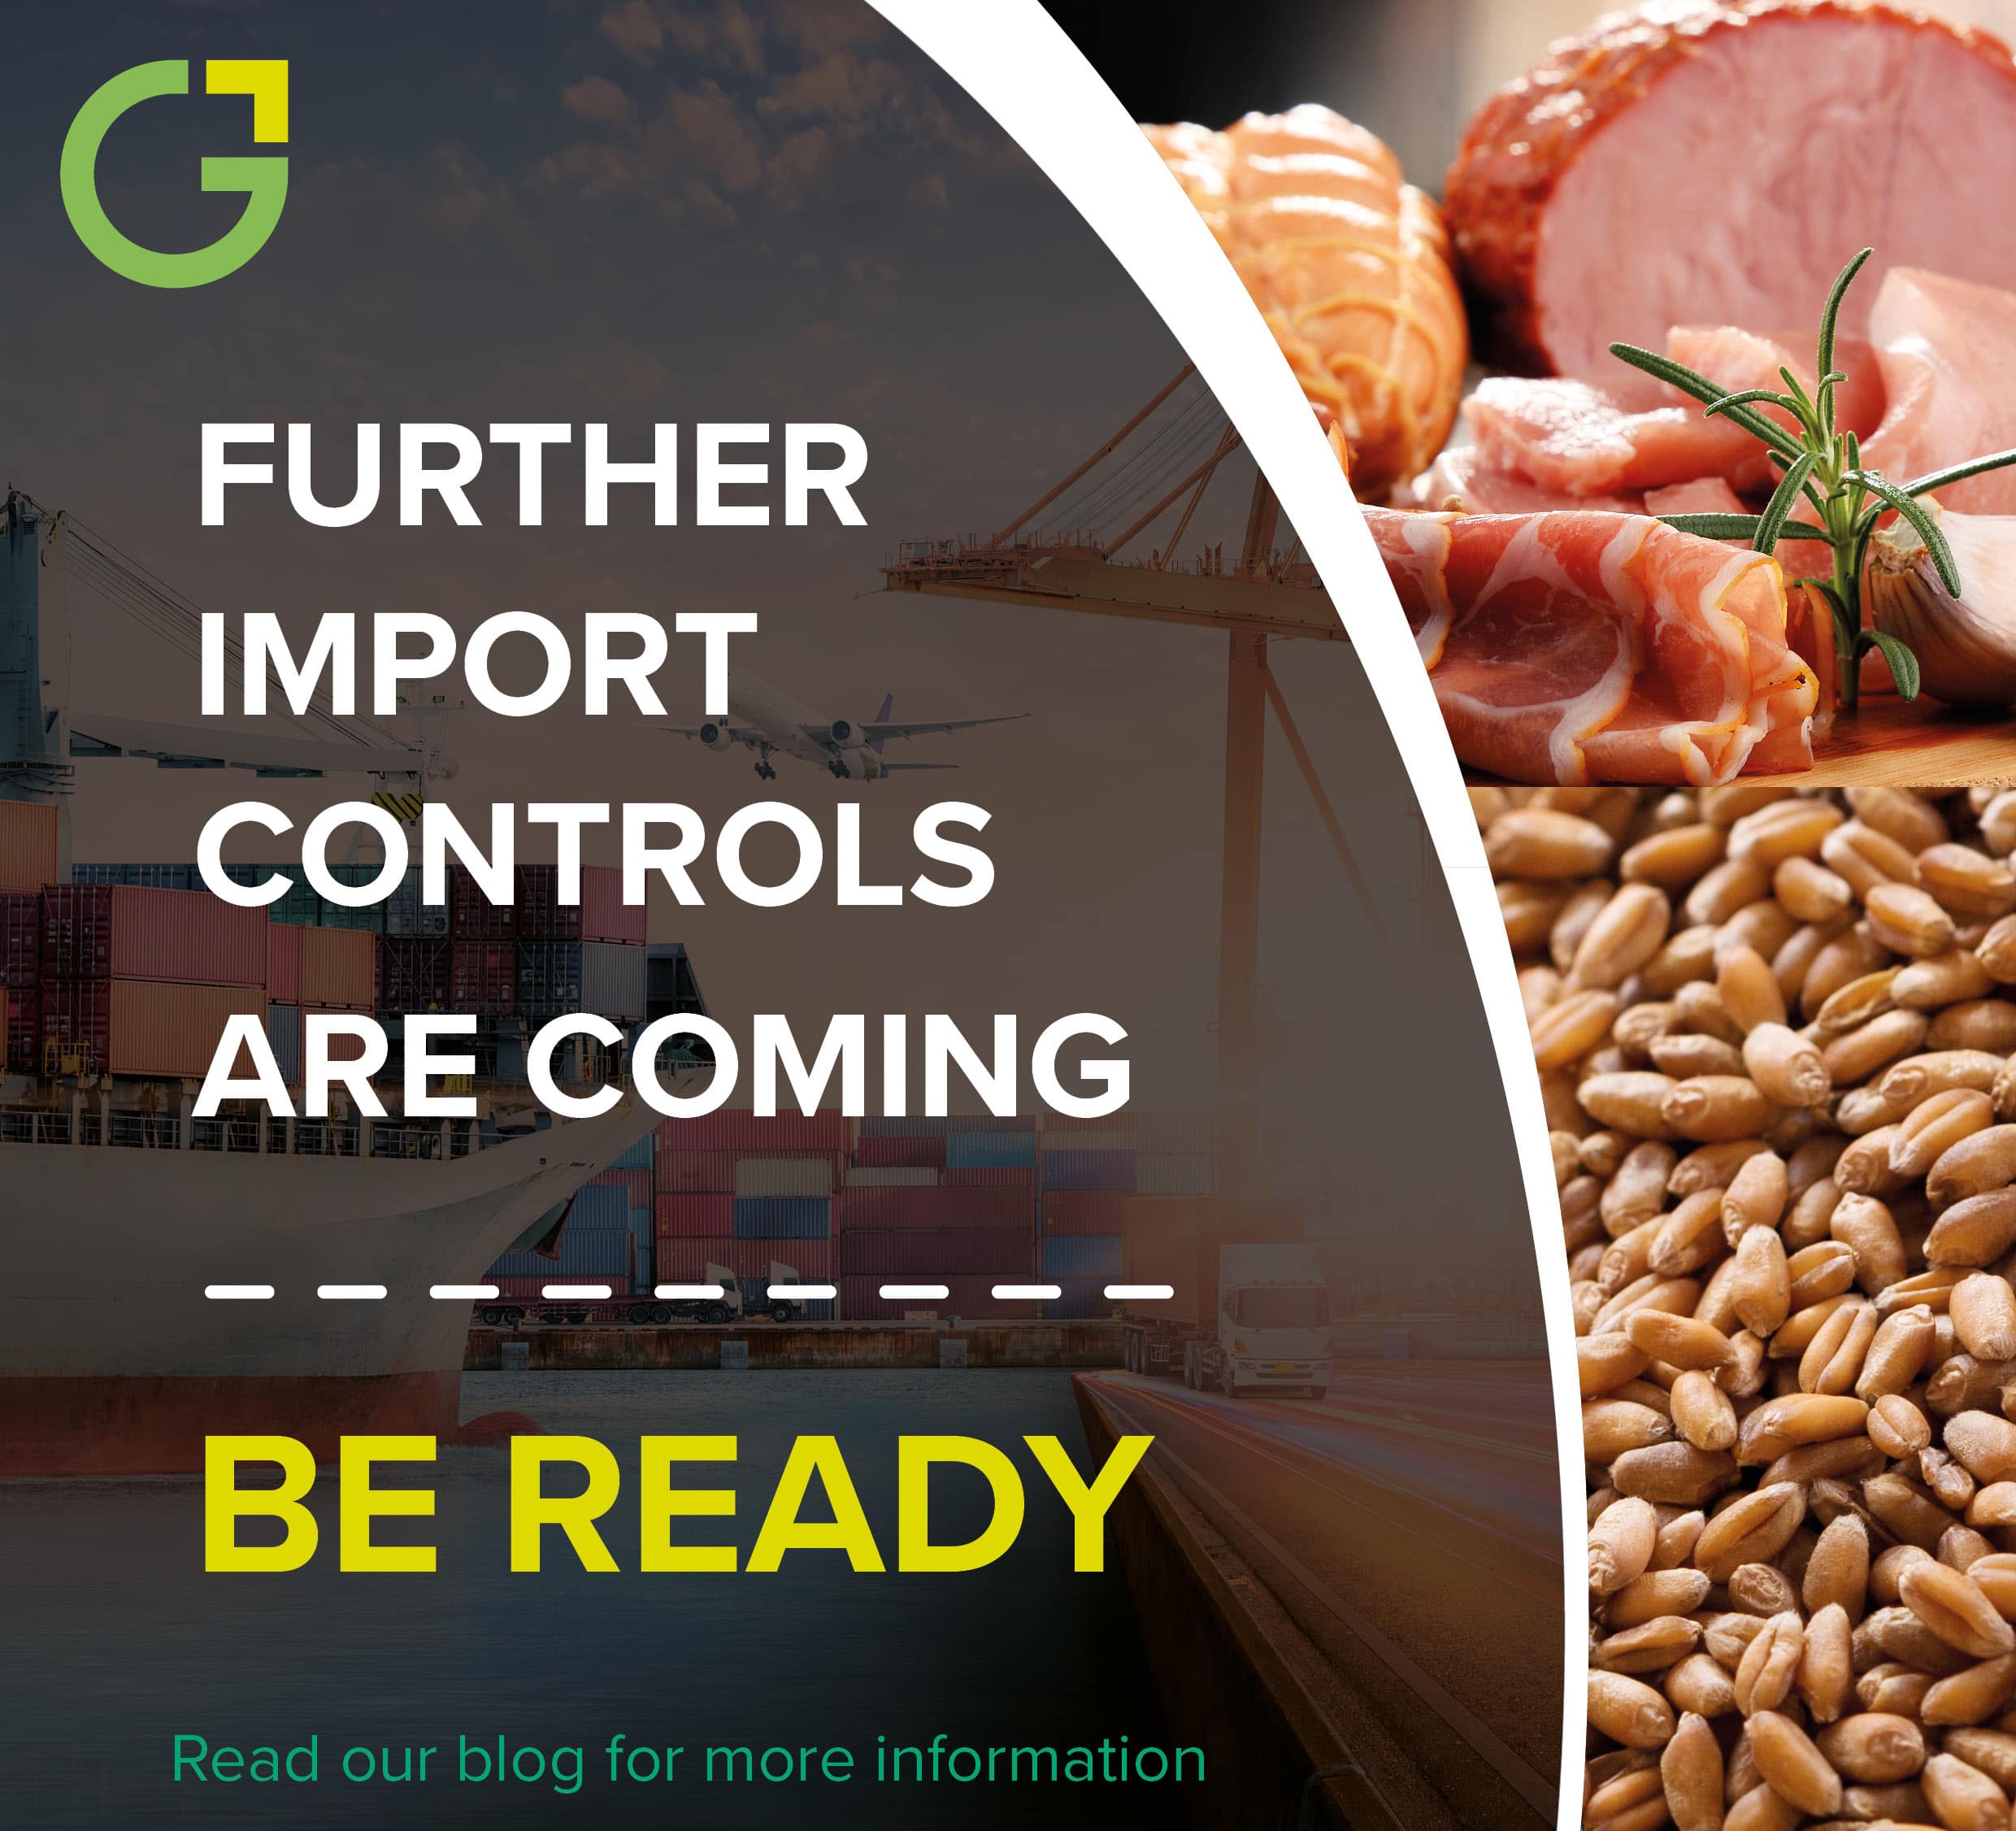 FURTHER IMPORT CONTROLS ARE COMING BE READY Read our blog for more information